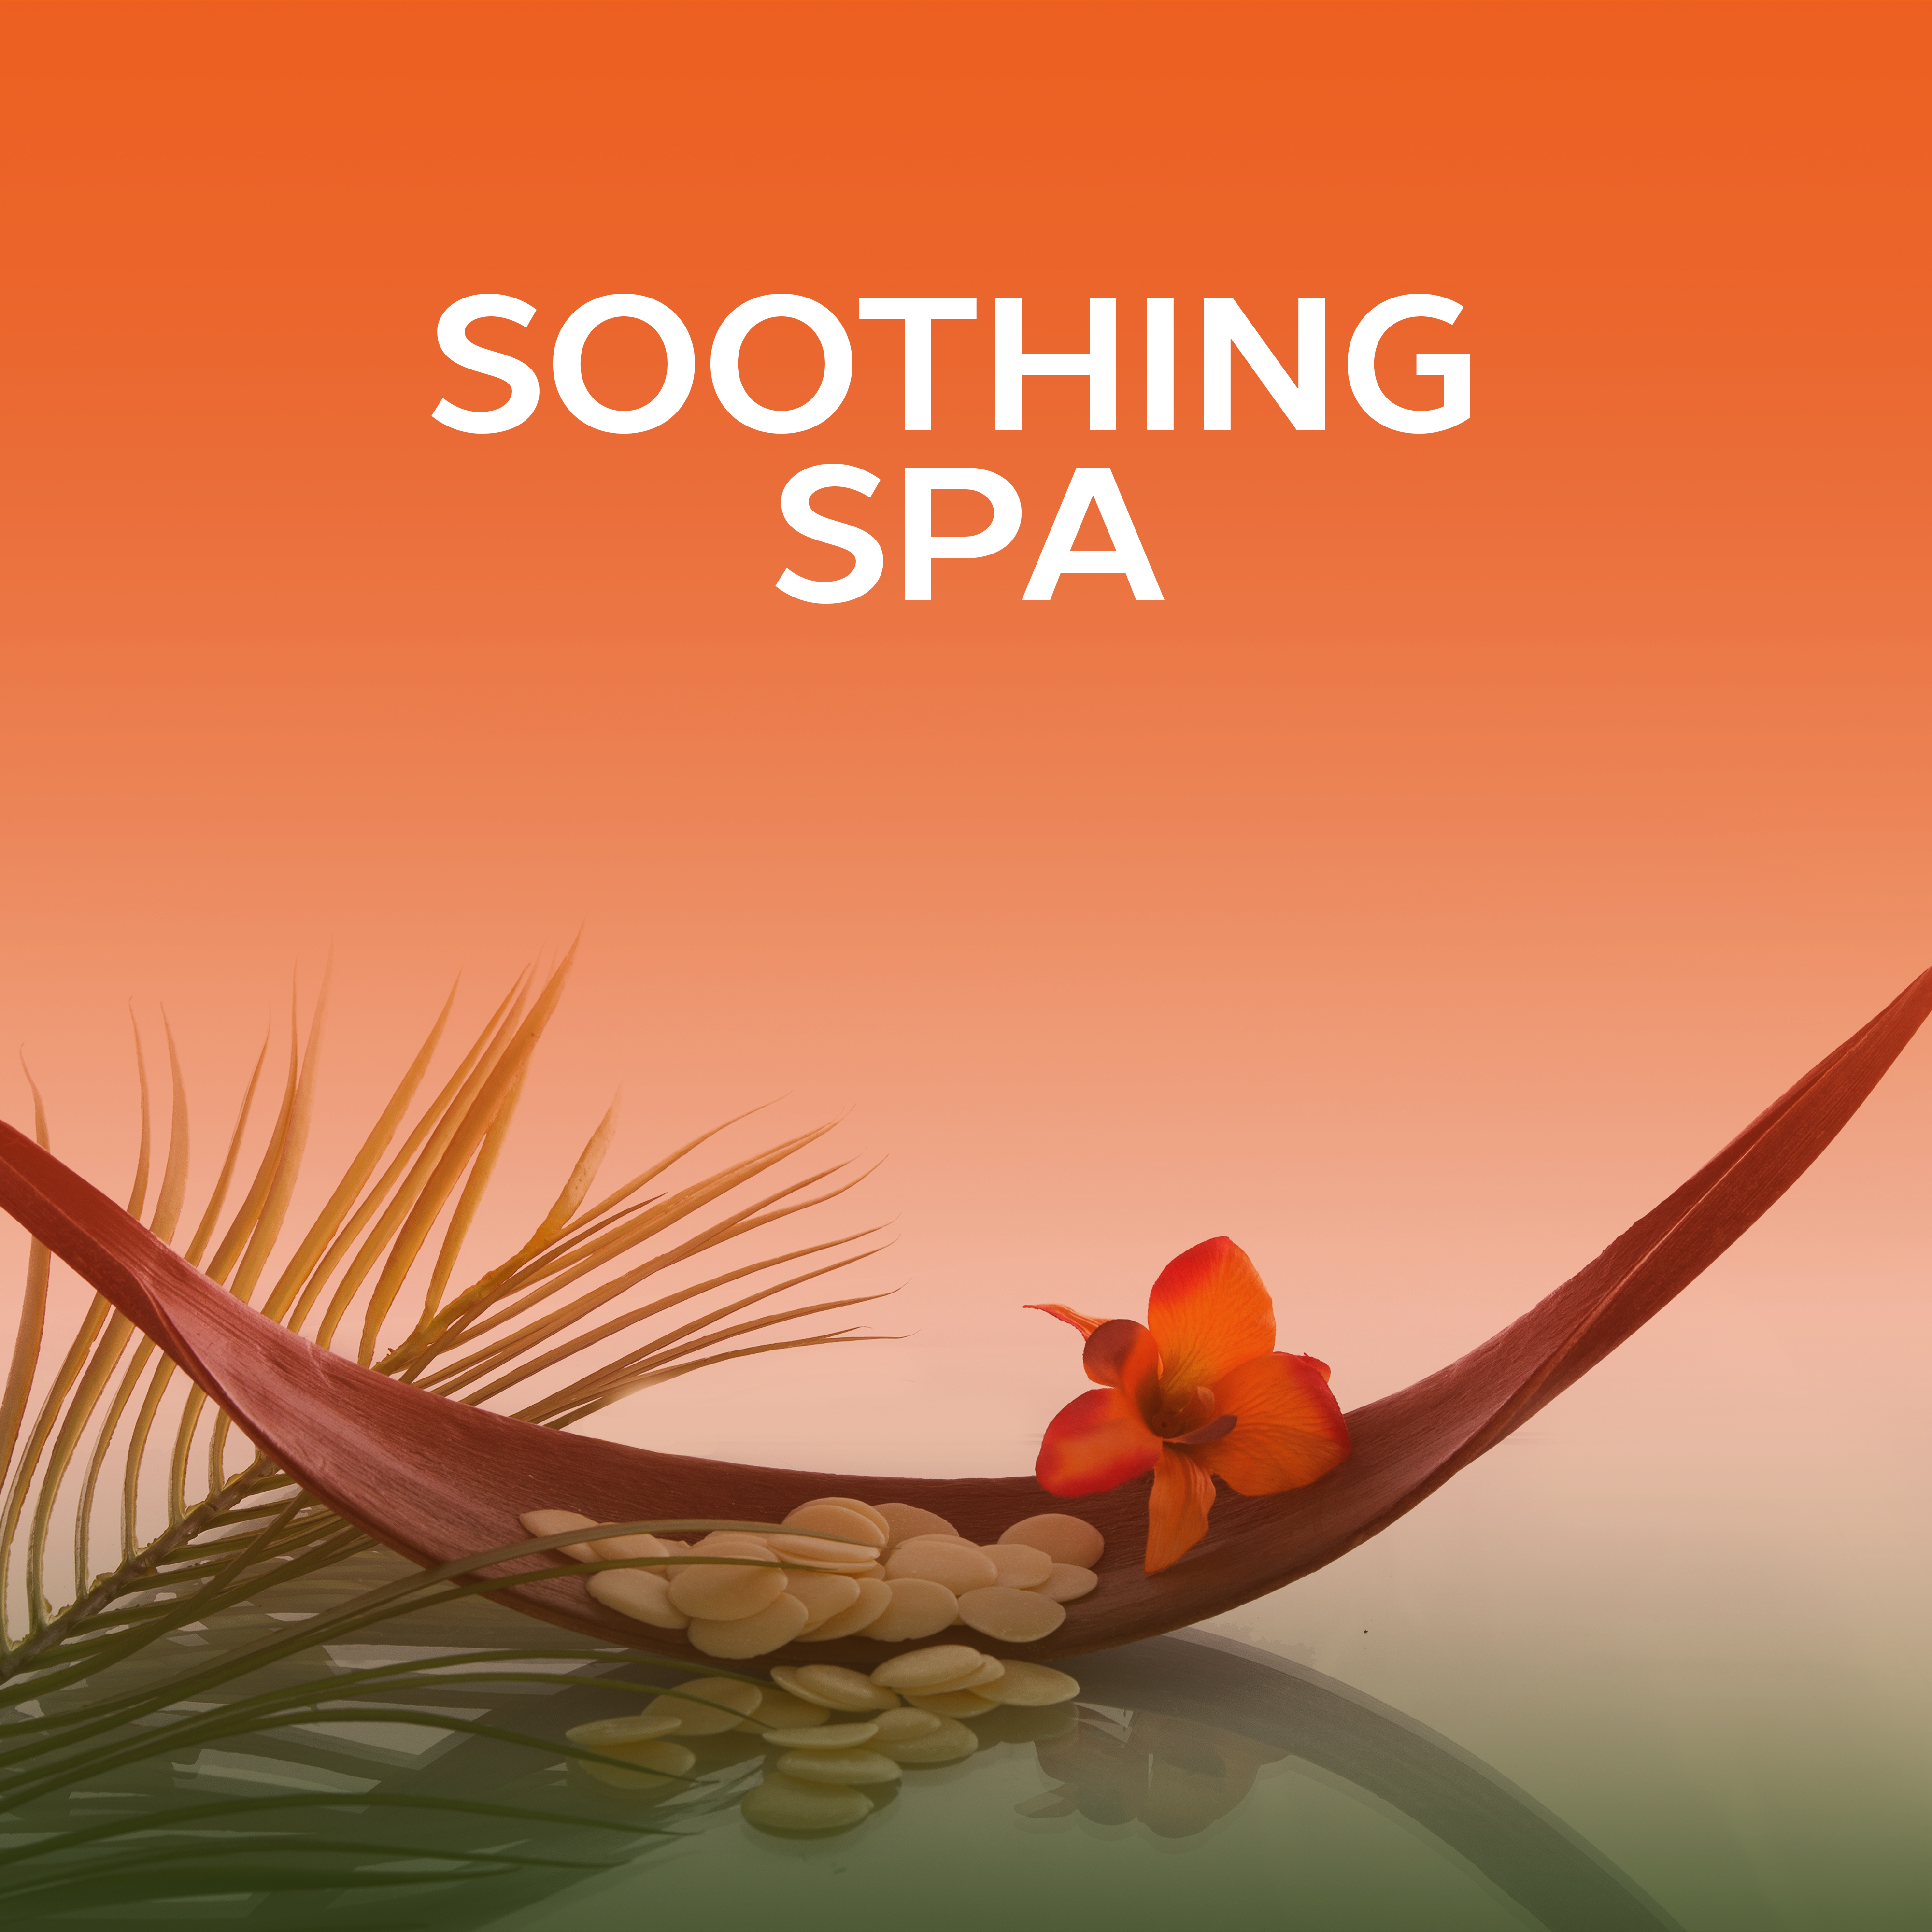 Soothing Spa – Relaxation Wellness, Spa Dreams, Peaceful Mind, Soft Music, Pure Massage, Nature Sounds for Relaxation